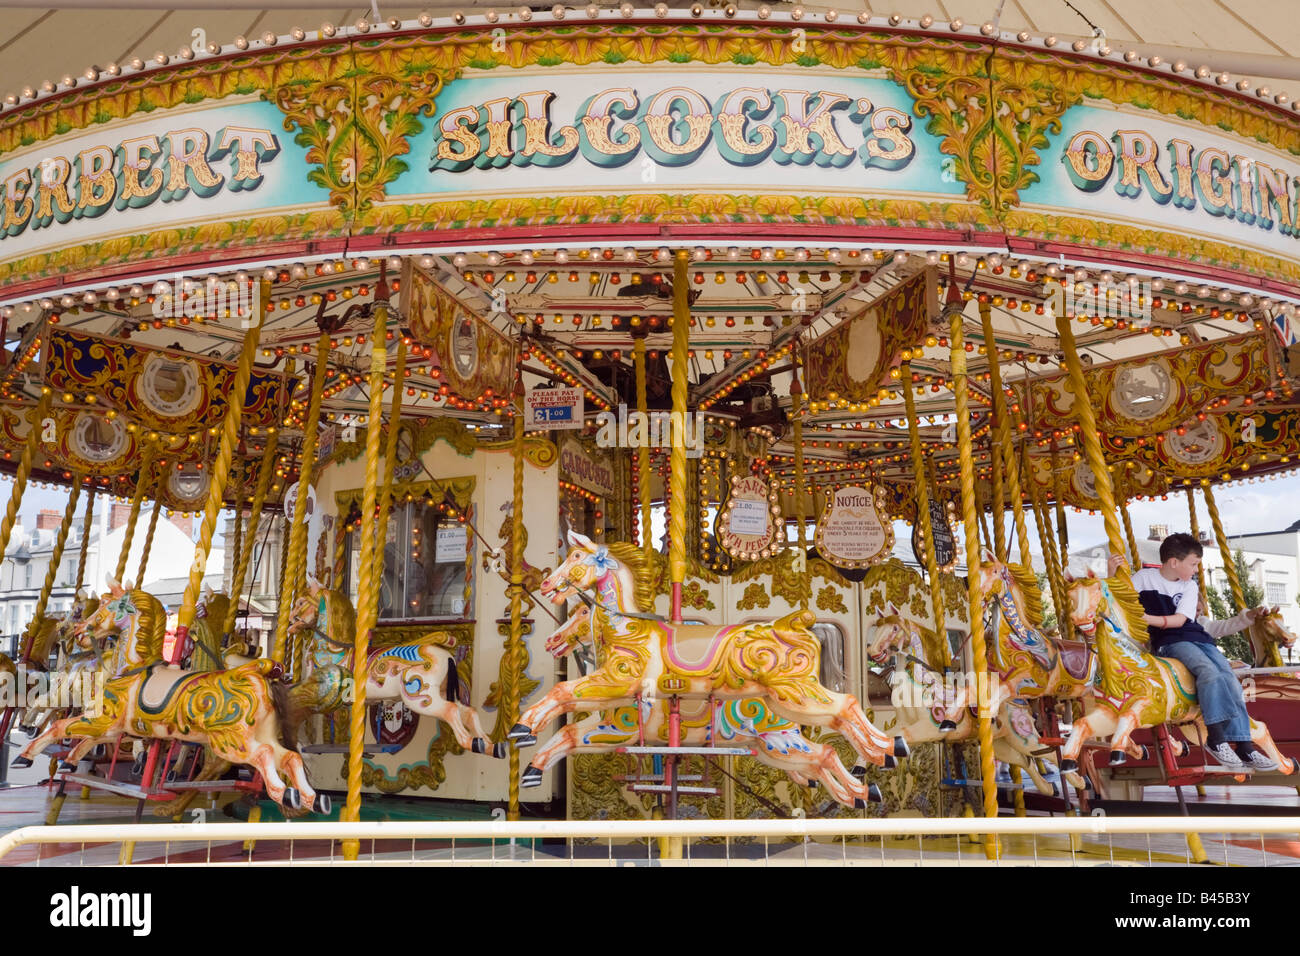 England UK Traditional Merry go Round carousel ride with horses Stock Photo